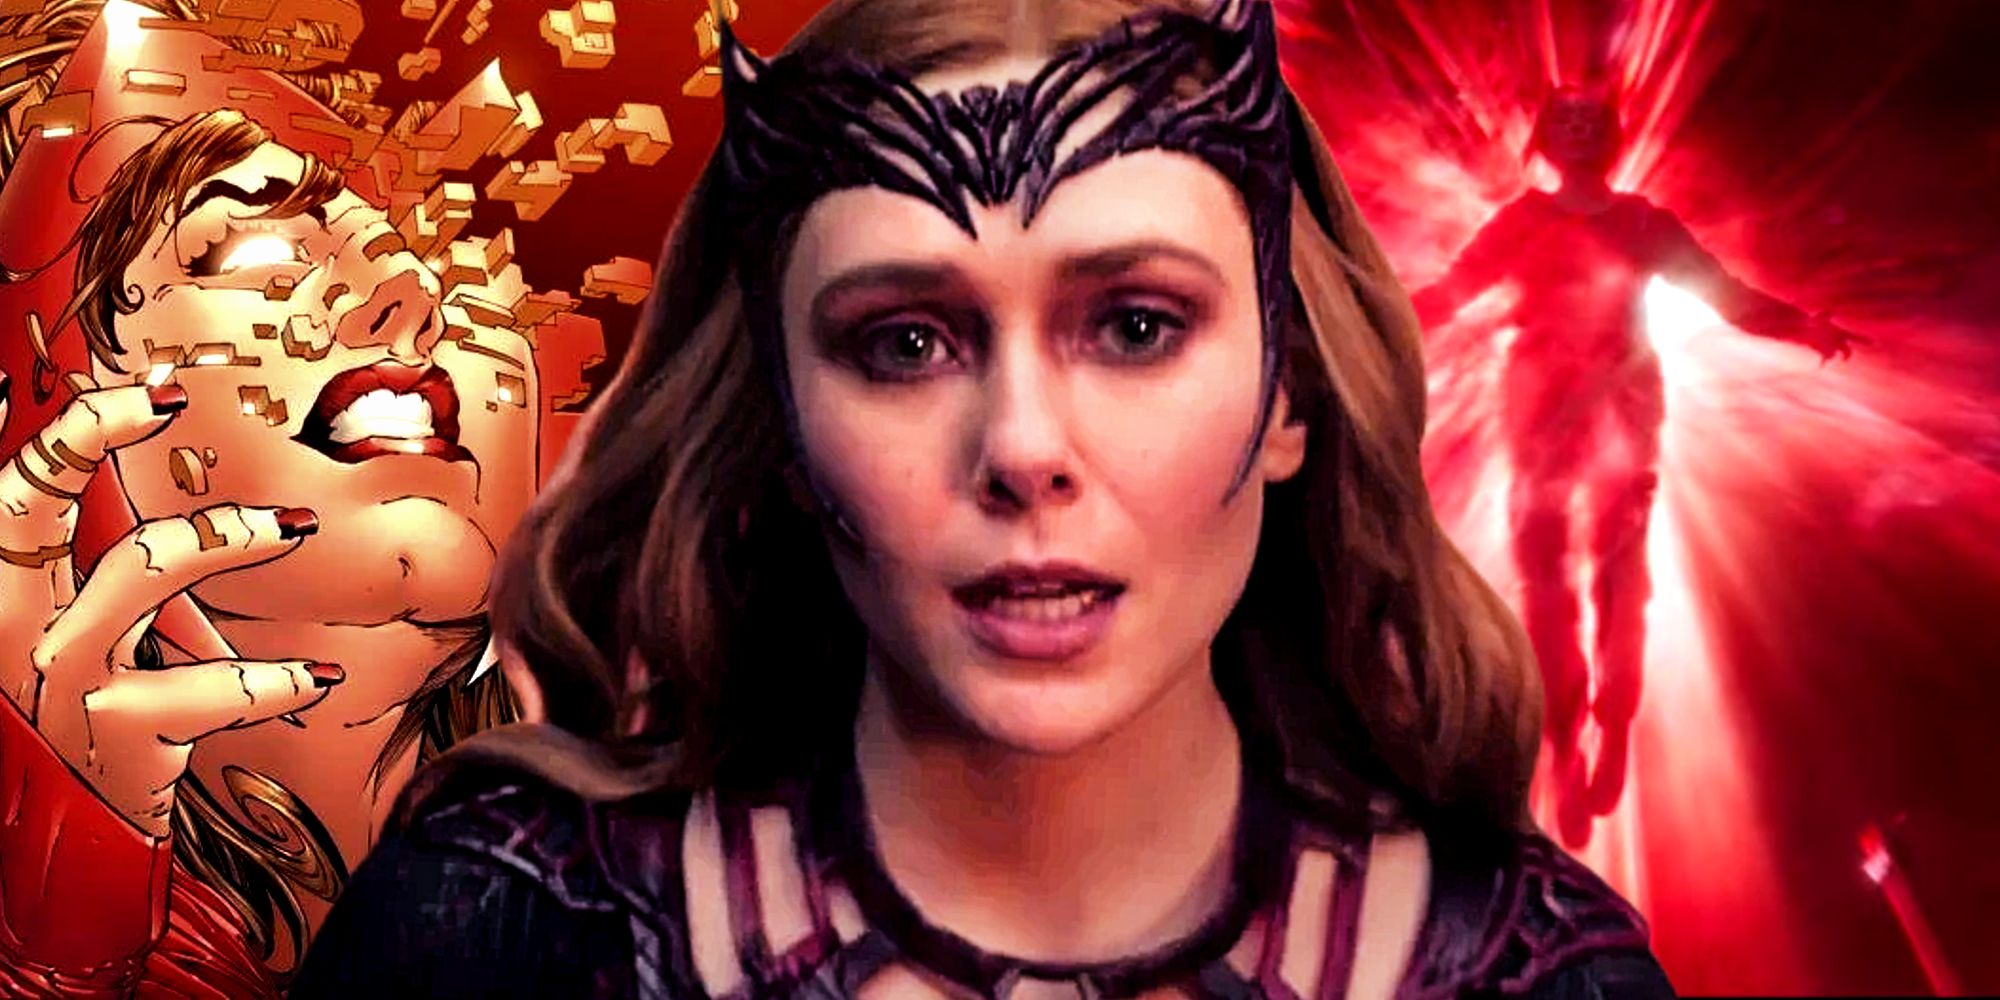 Scarlet Witch's Powers in the MCU and Marvel Comics